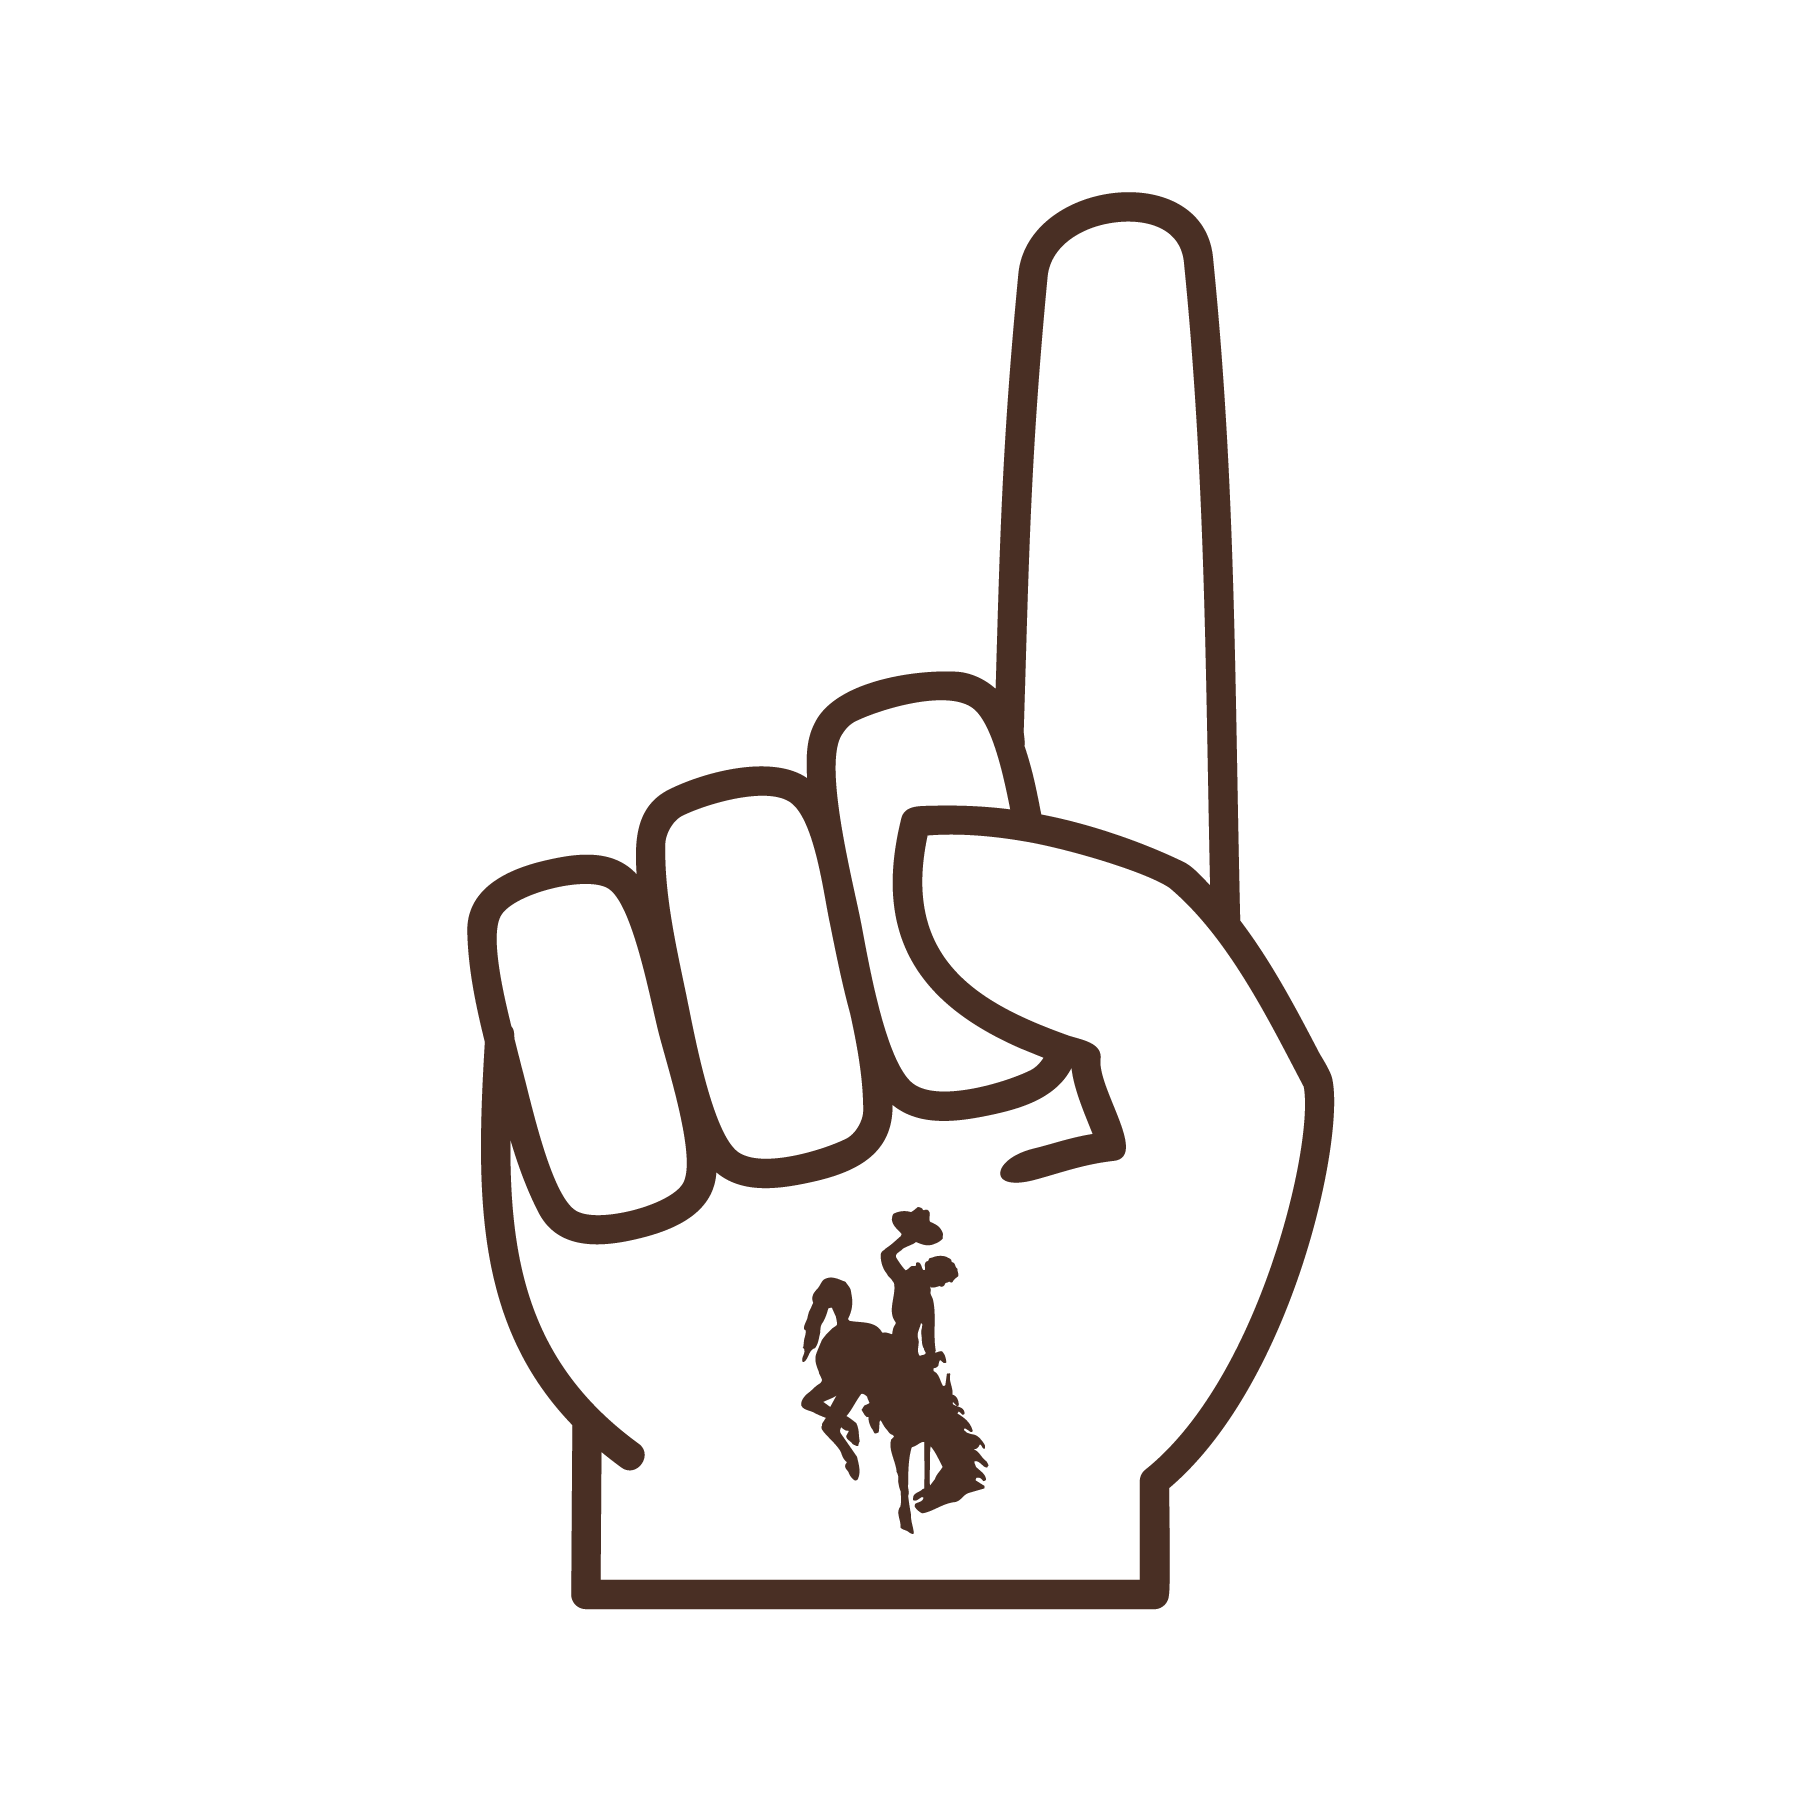 A pointing finger glove icon